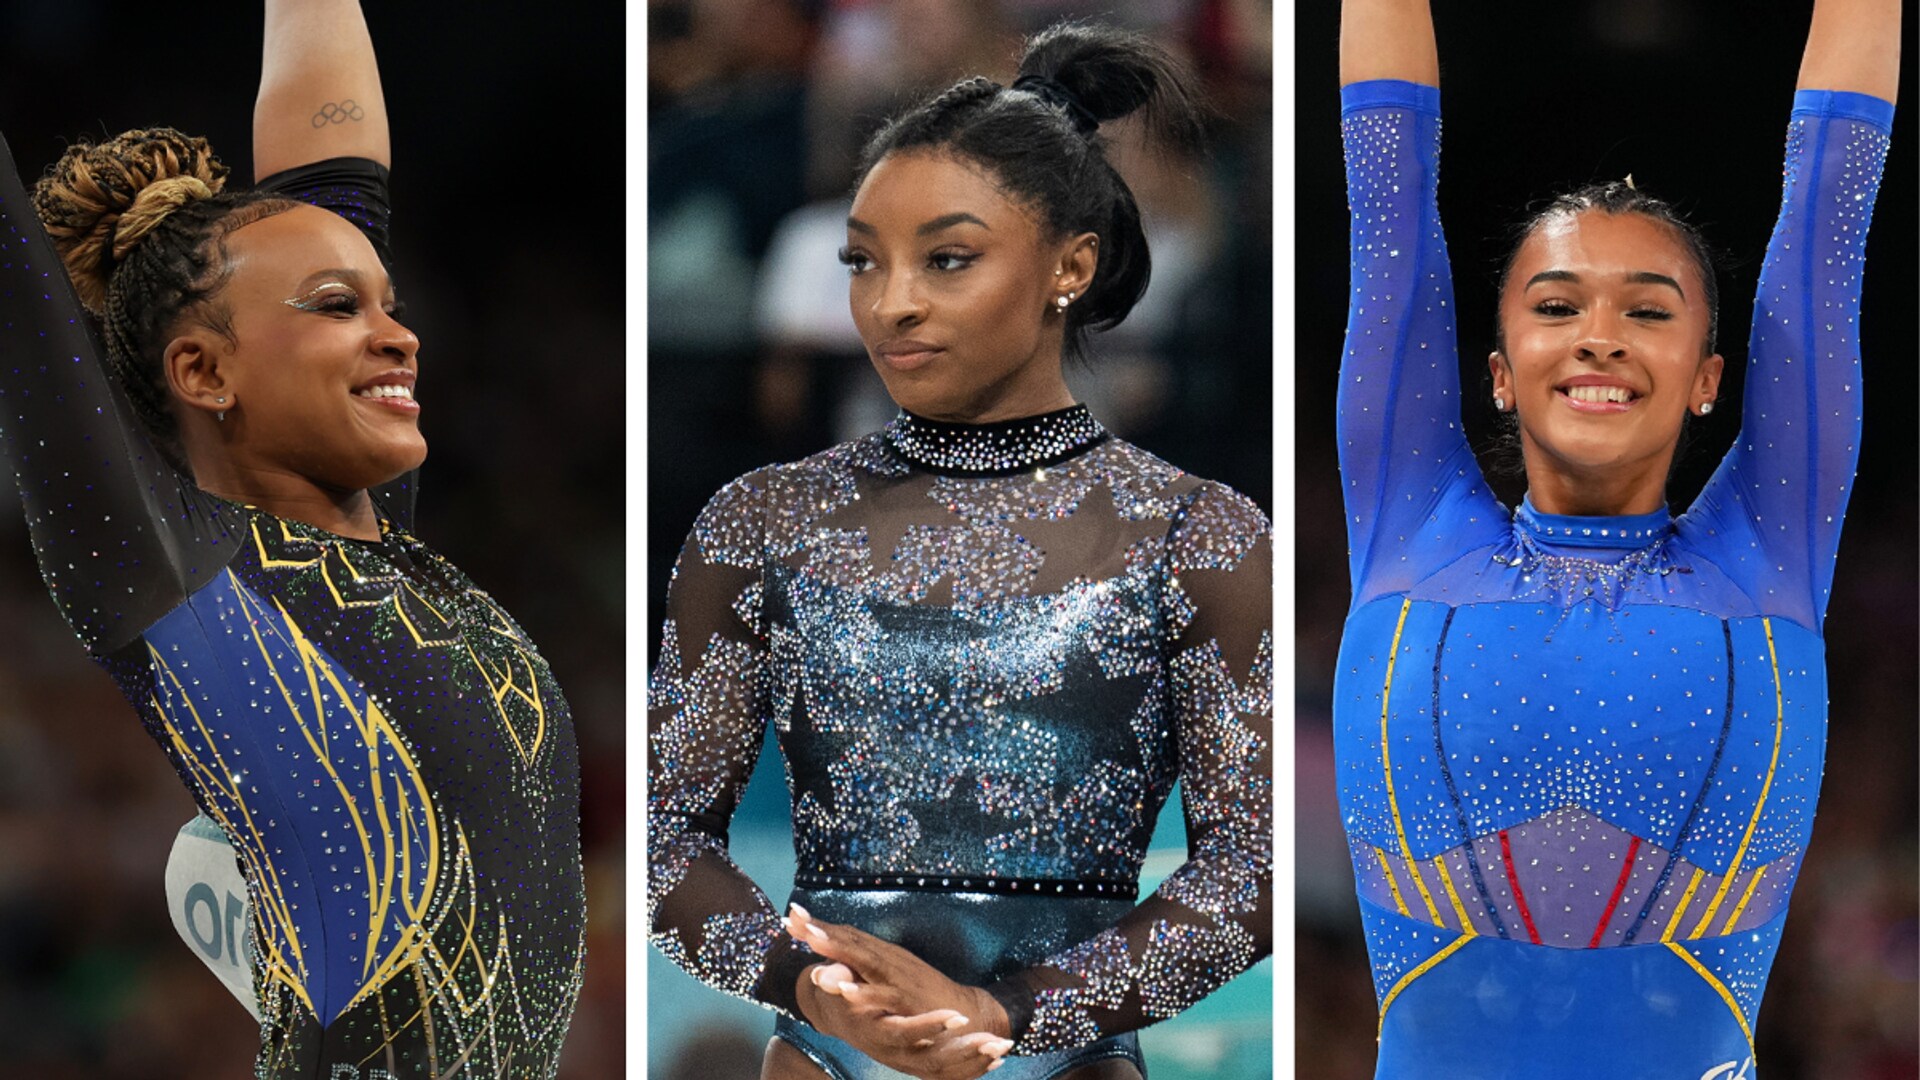 Latina Gymnasts to Compete Against Simone Biles in the 2024 Olympic Finals